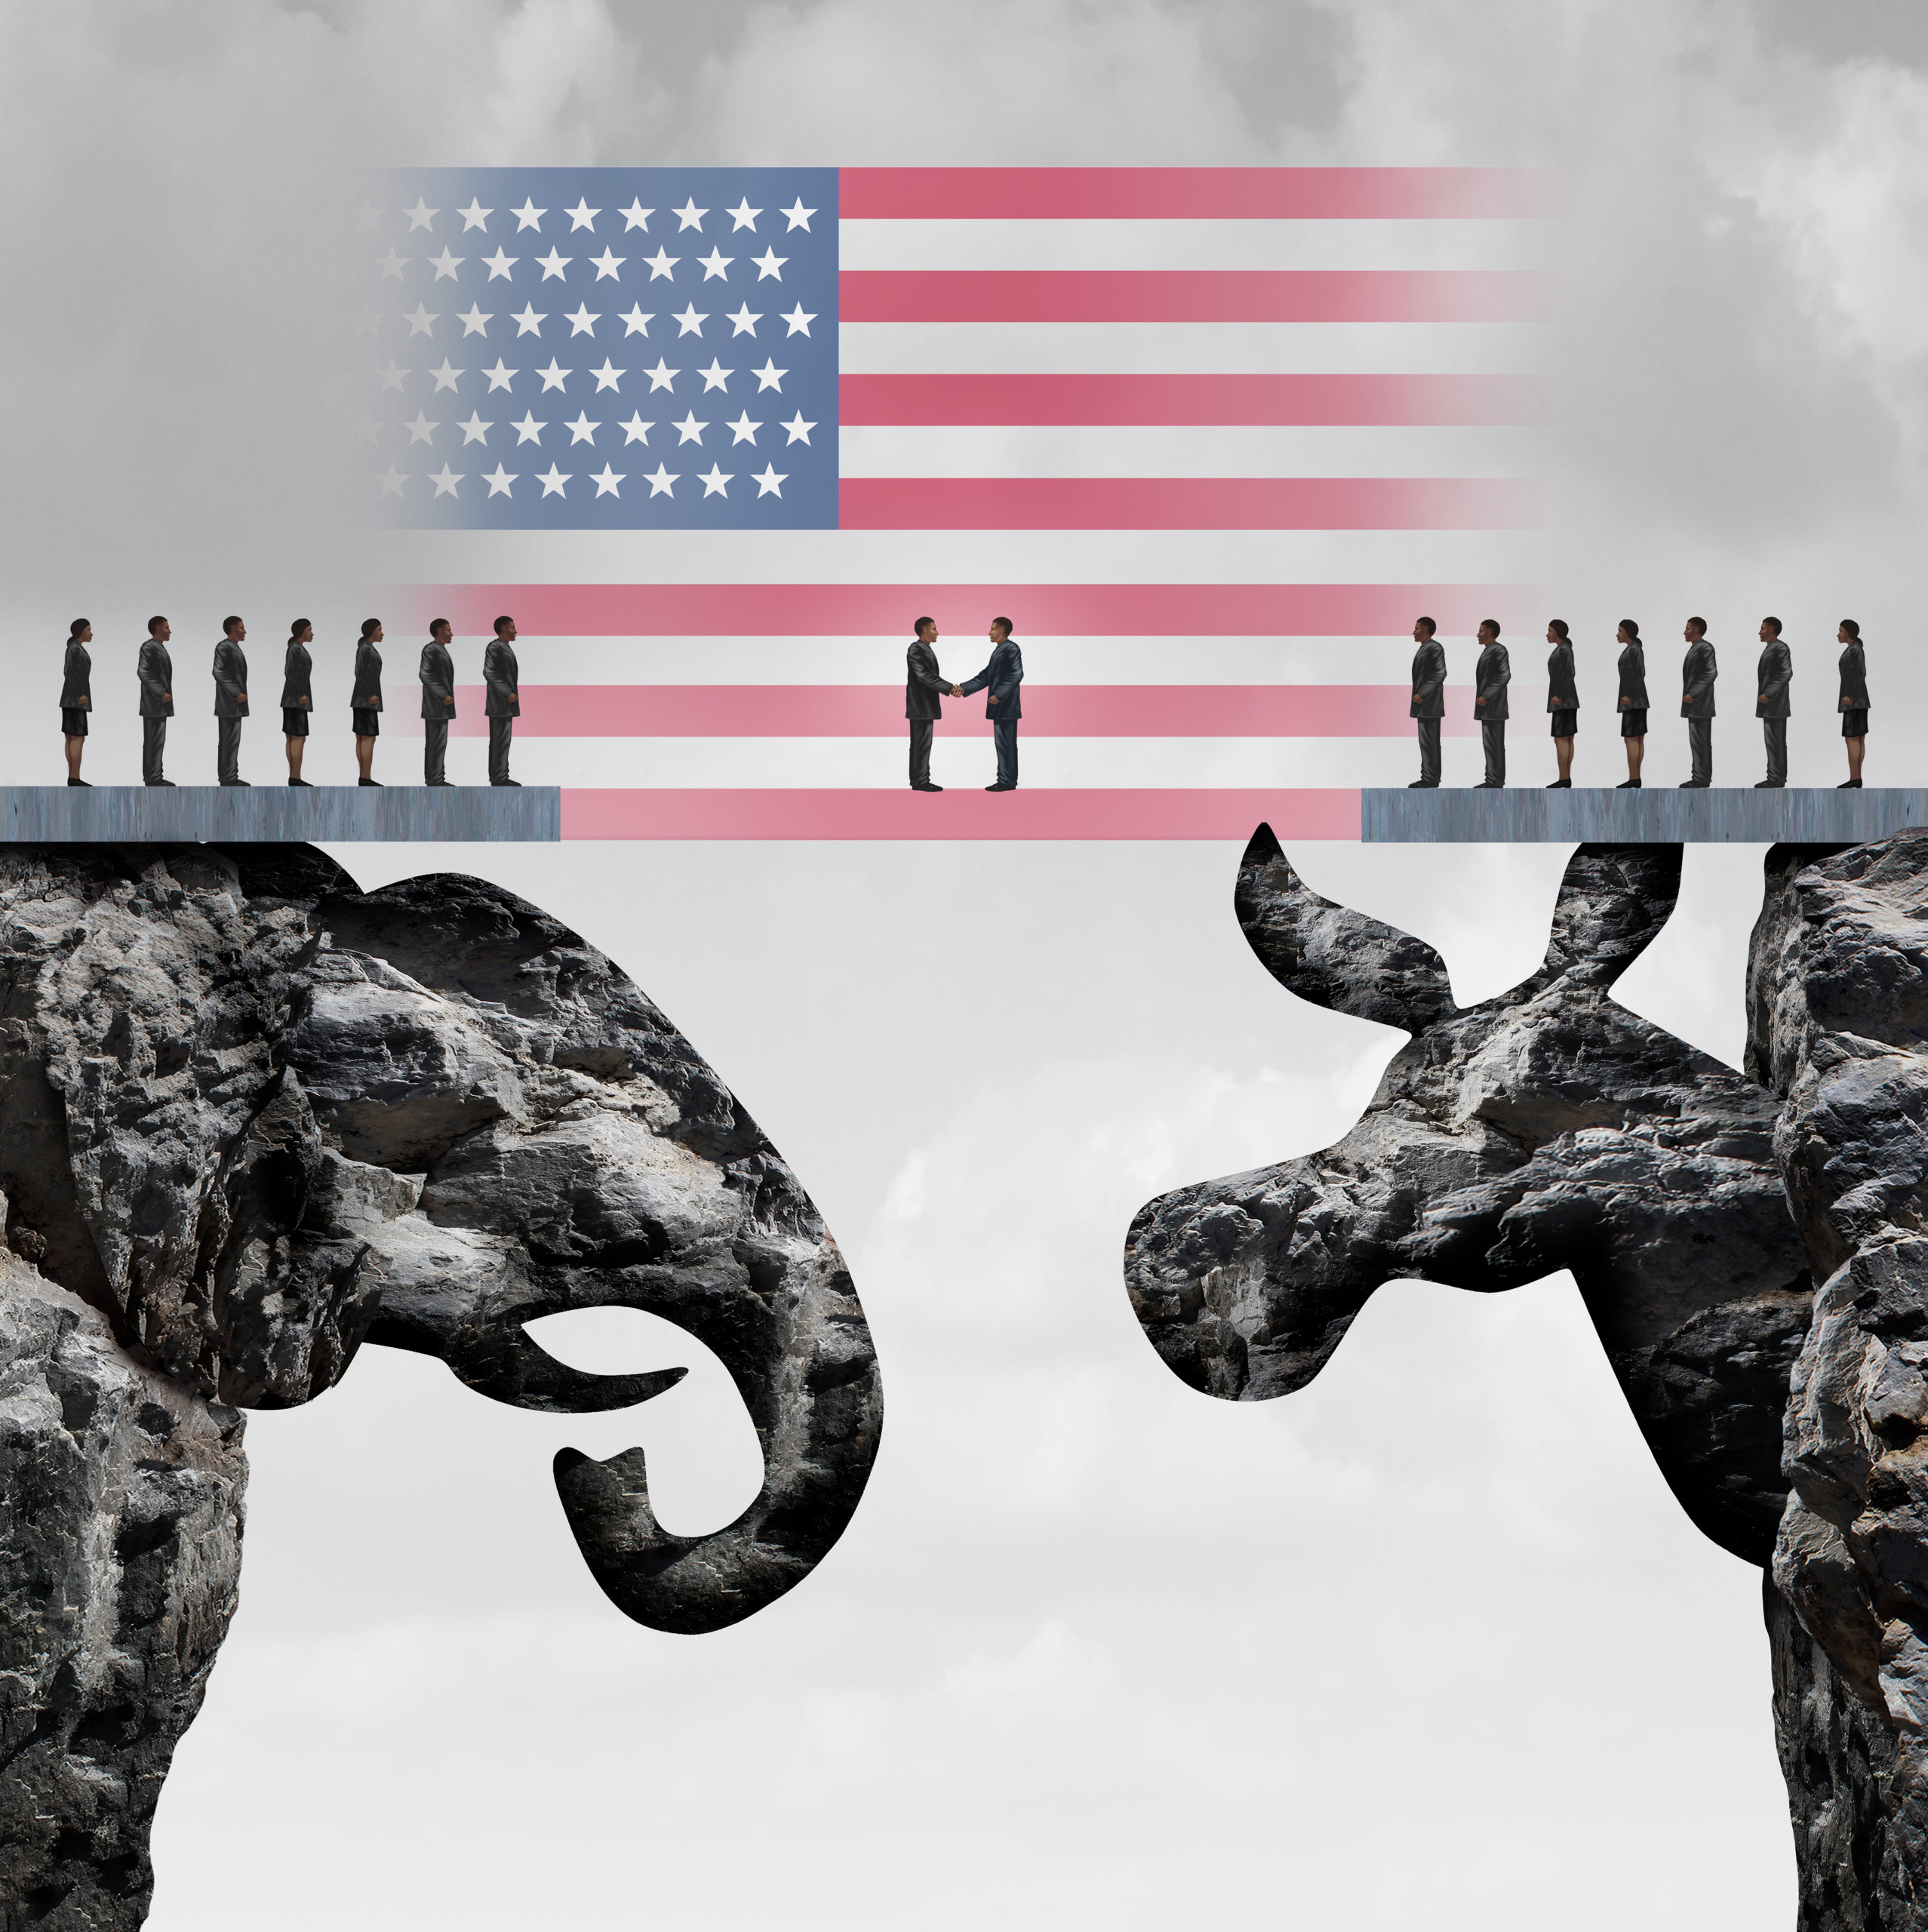 Artists rendition of two people meeting in the middle of a bridge held up by a stone elephant and stone donkey. There is an American flag in the background.